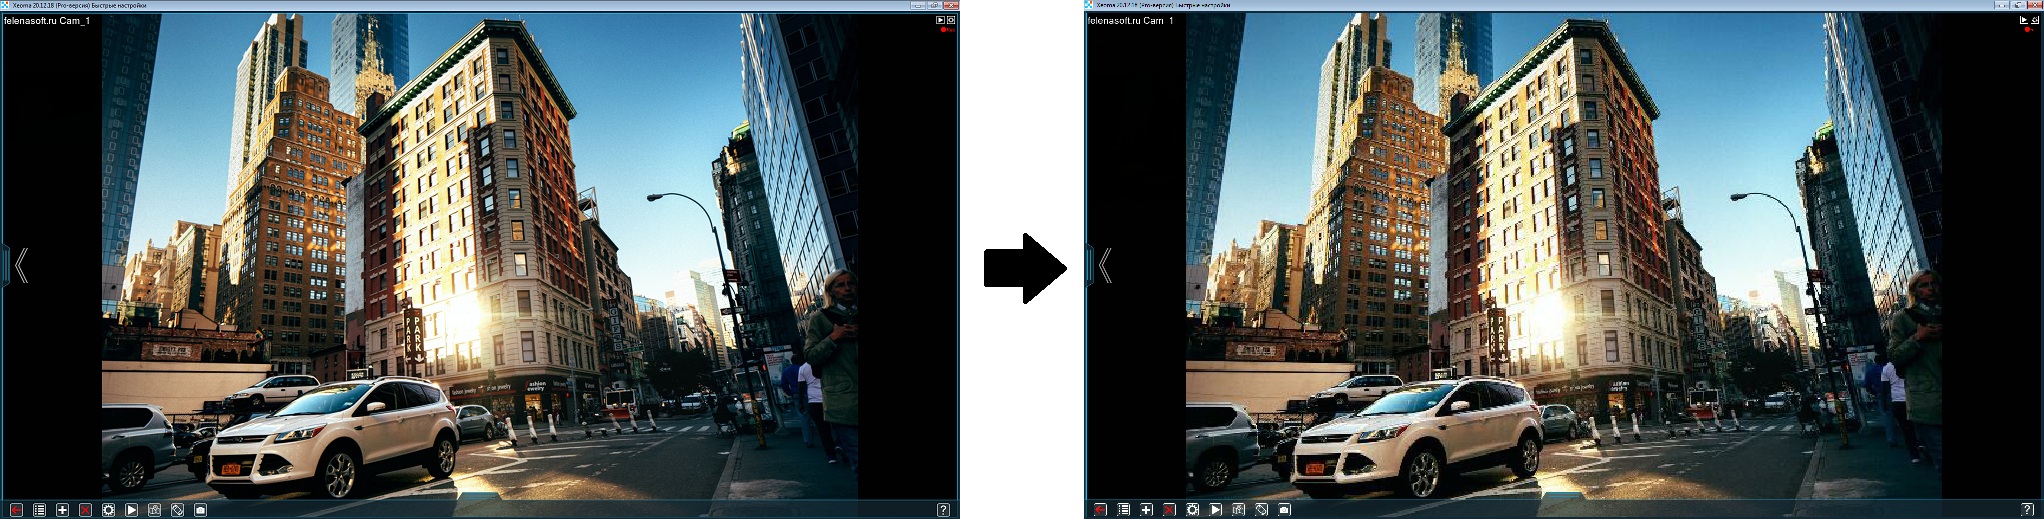 Image resize module in cctv software Xeoma